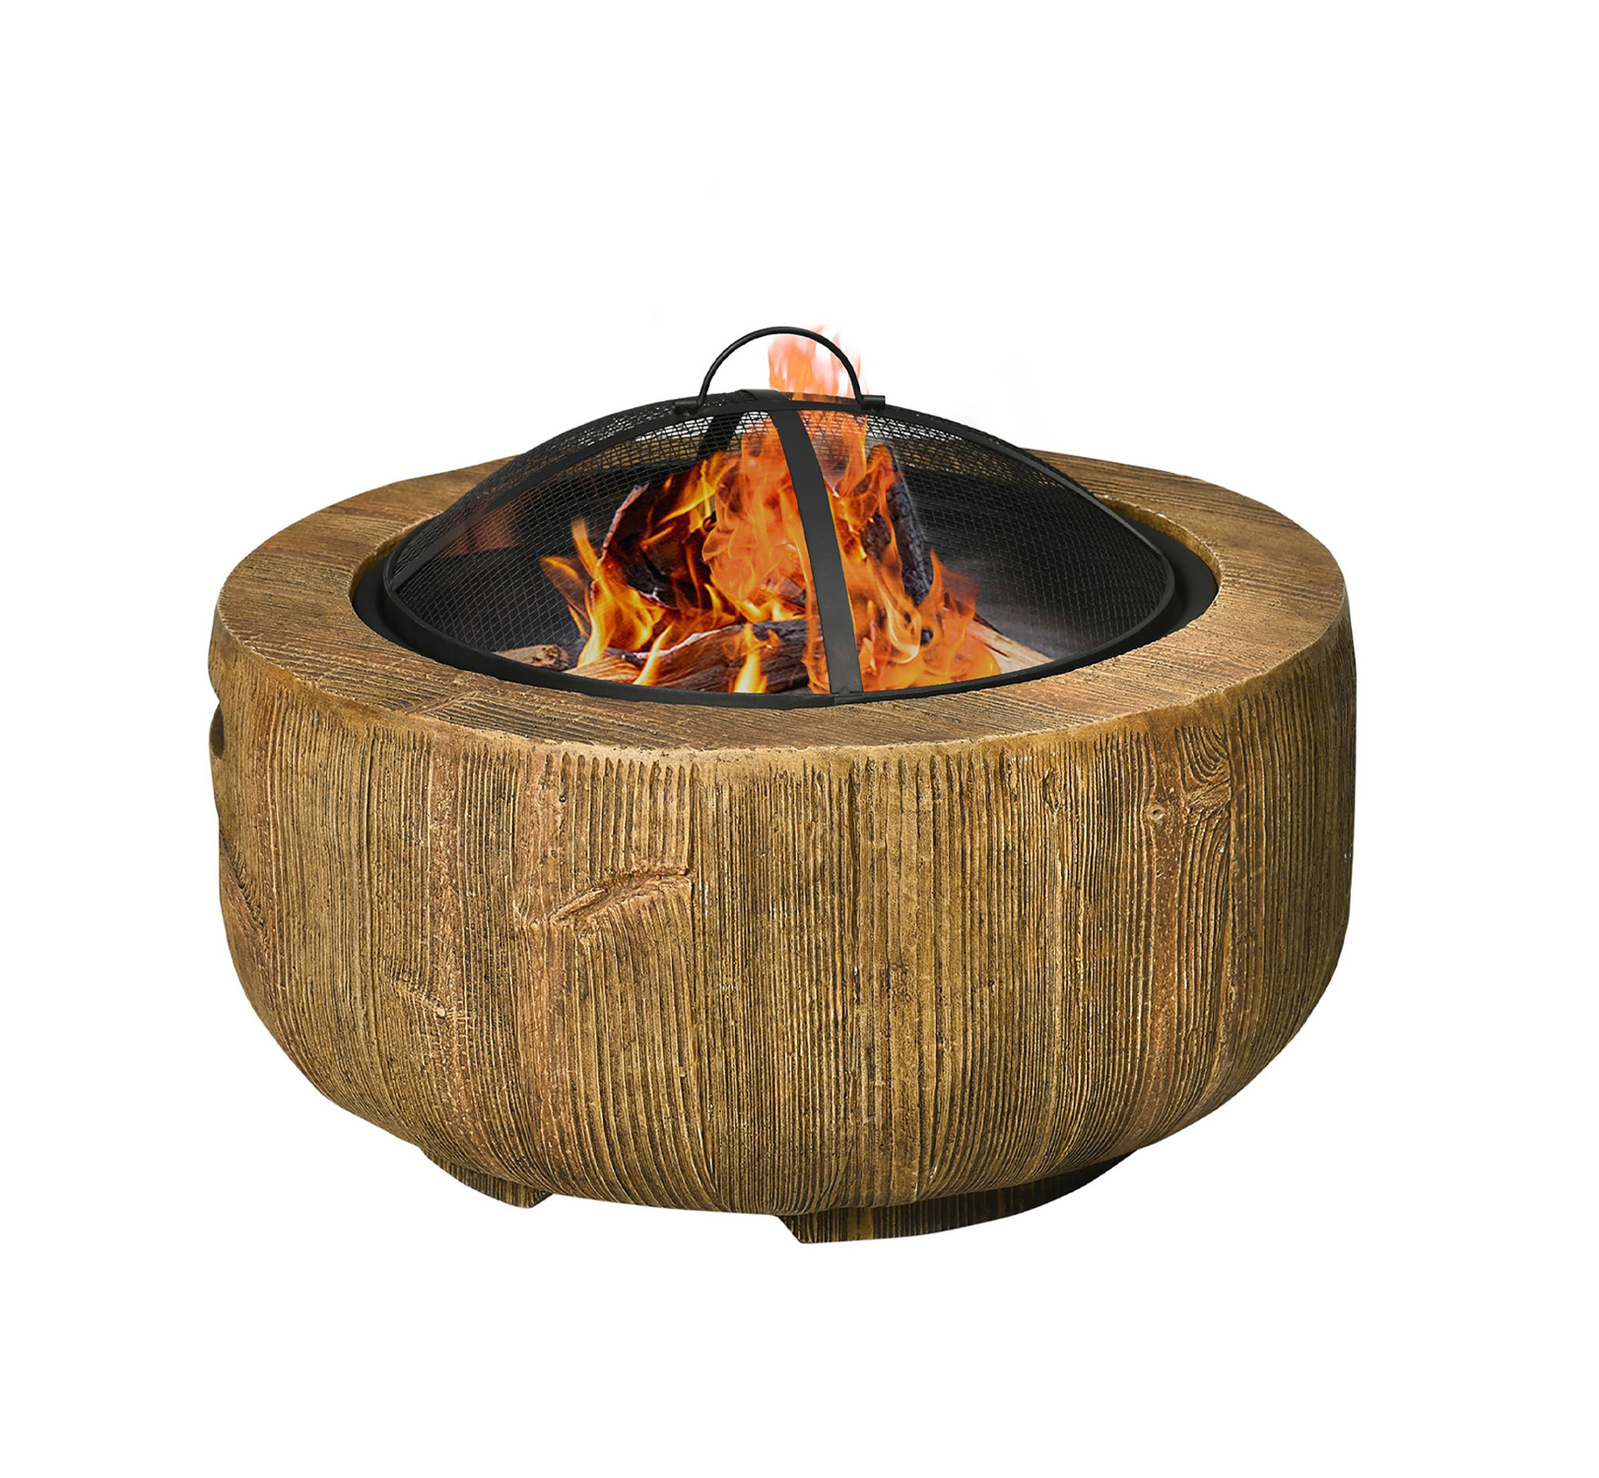 Outdoor Fire Pit Charcoal Bbq Grill Camping Patio Heater Fireplace Tree Stump Design